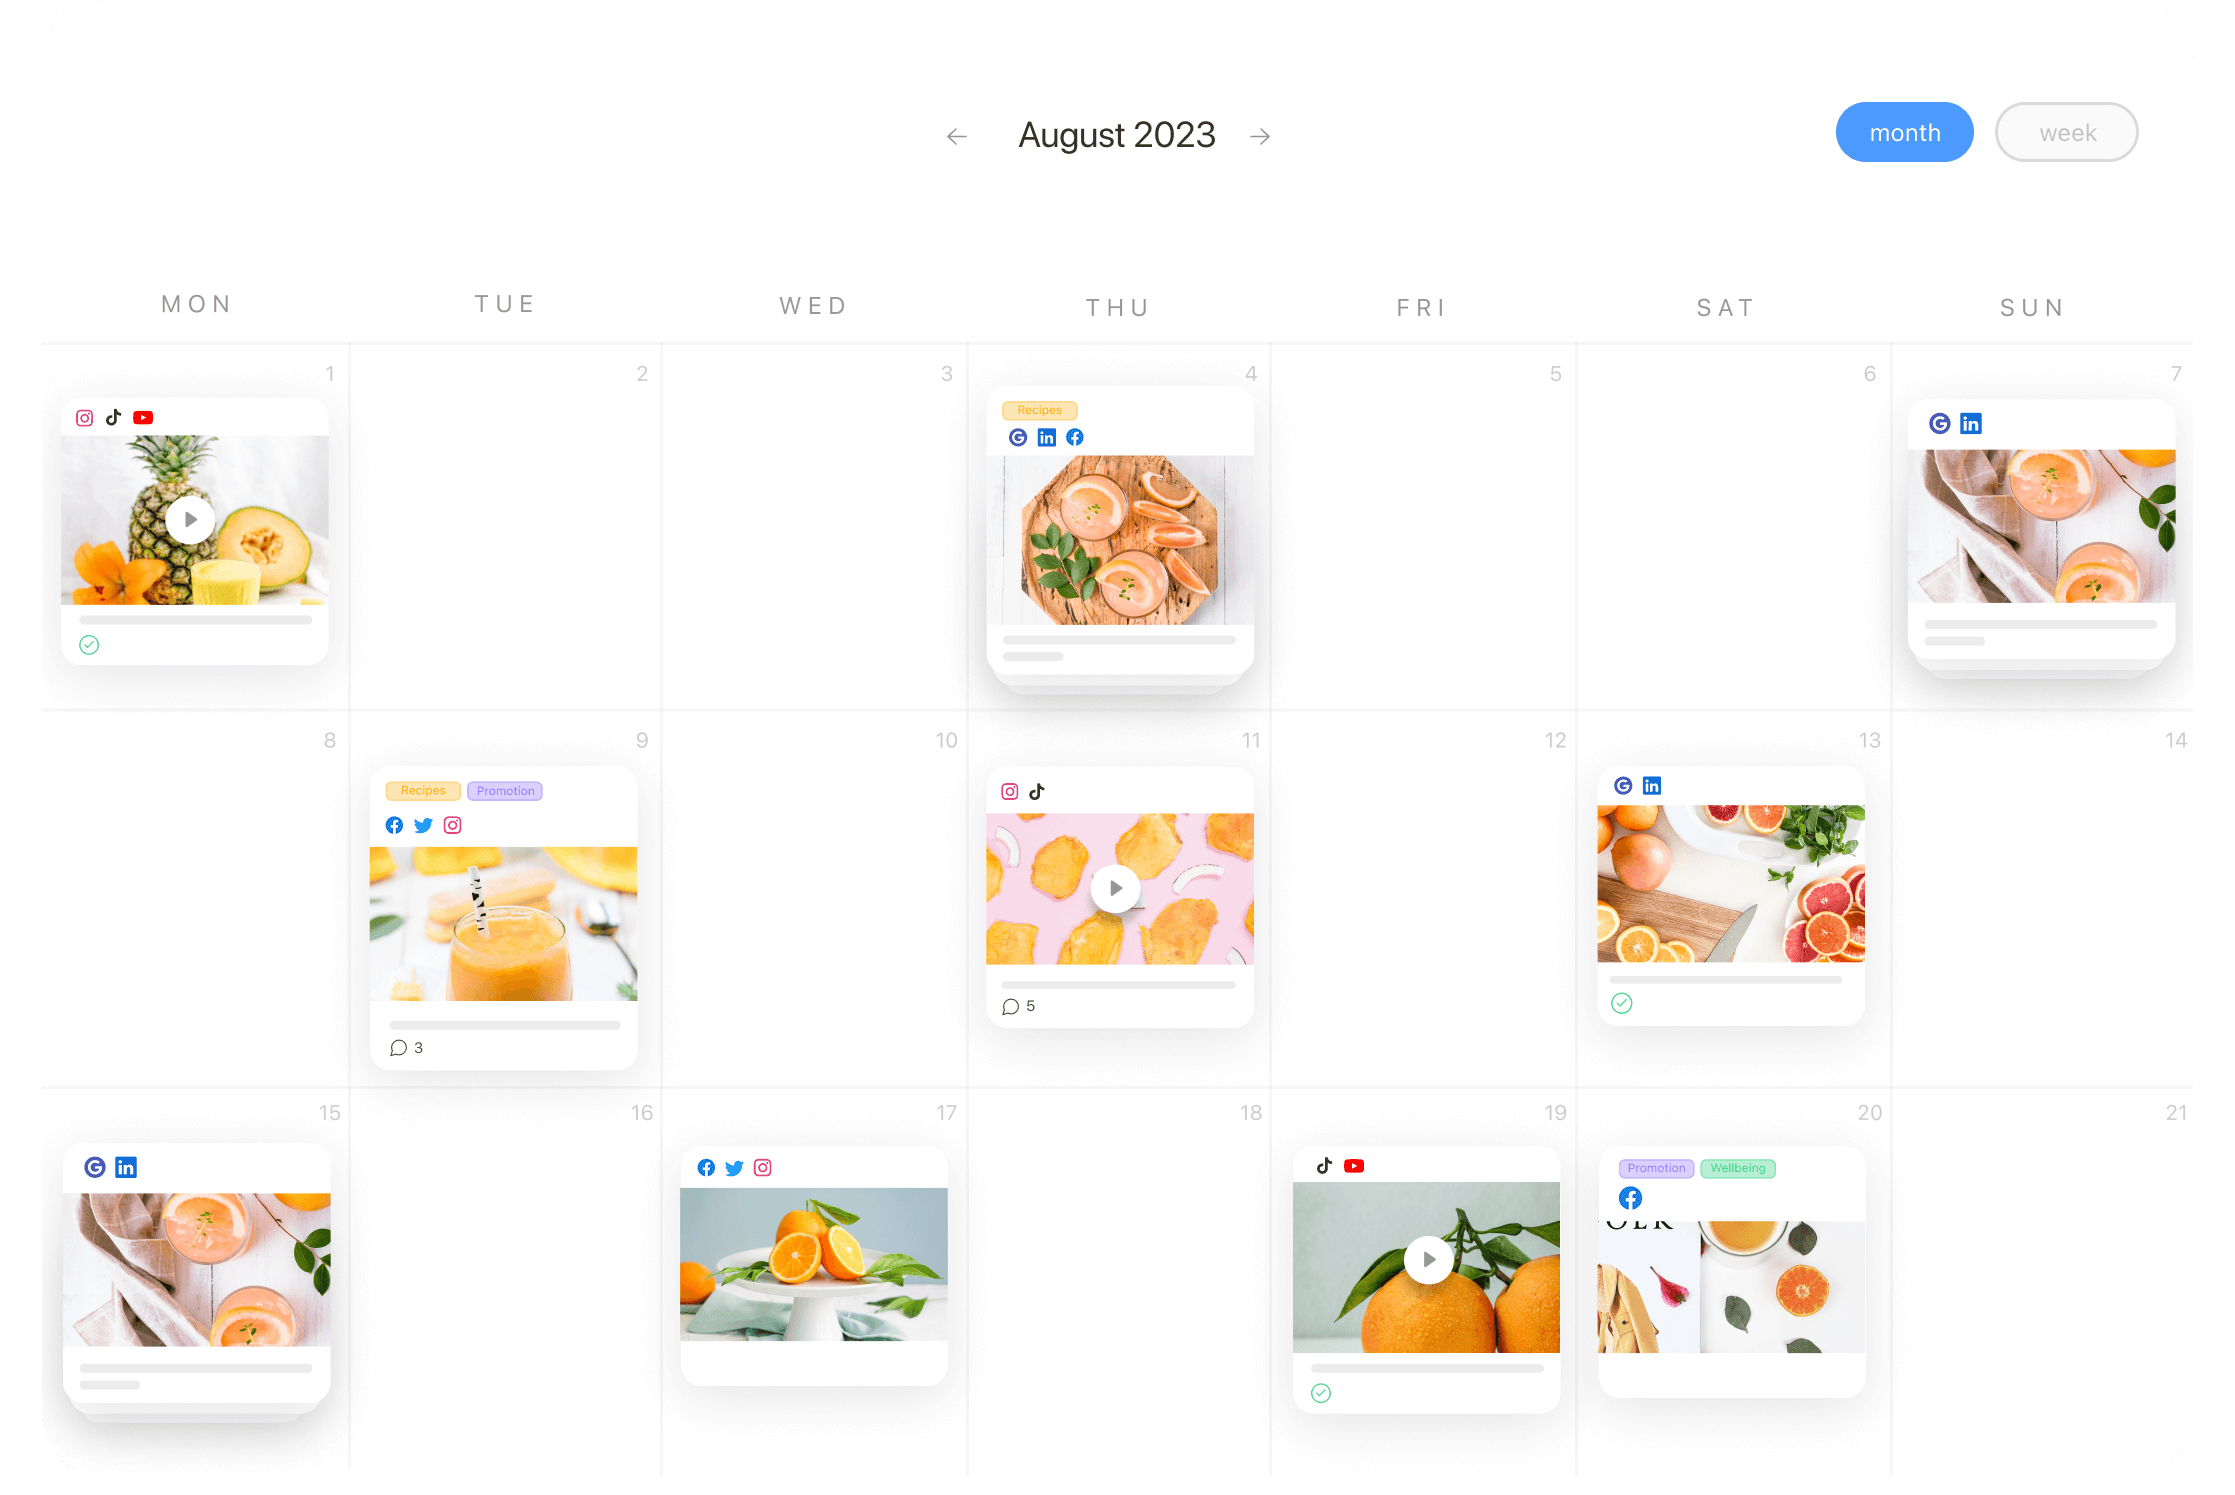 social media management tool with visual calendar planning feature